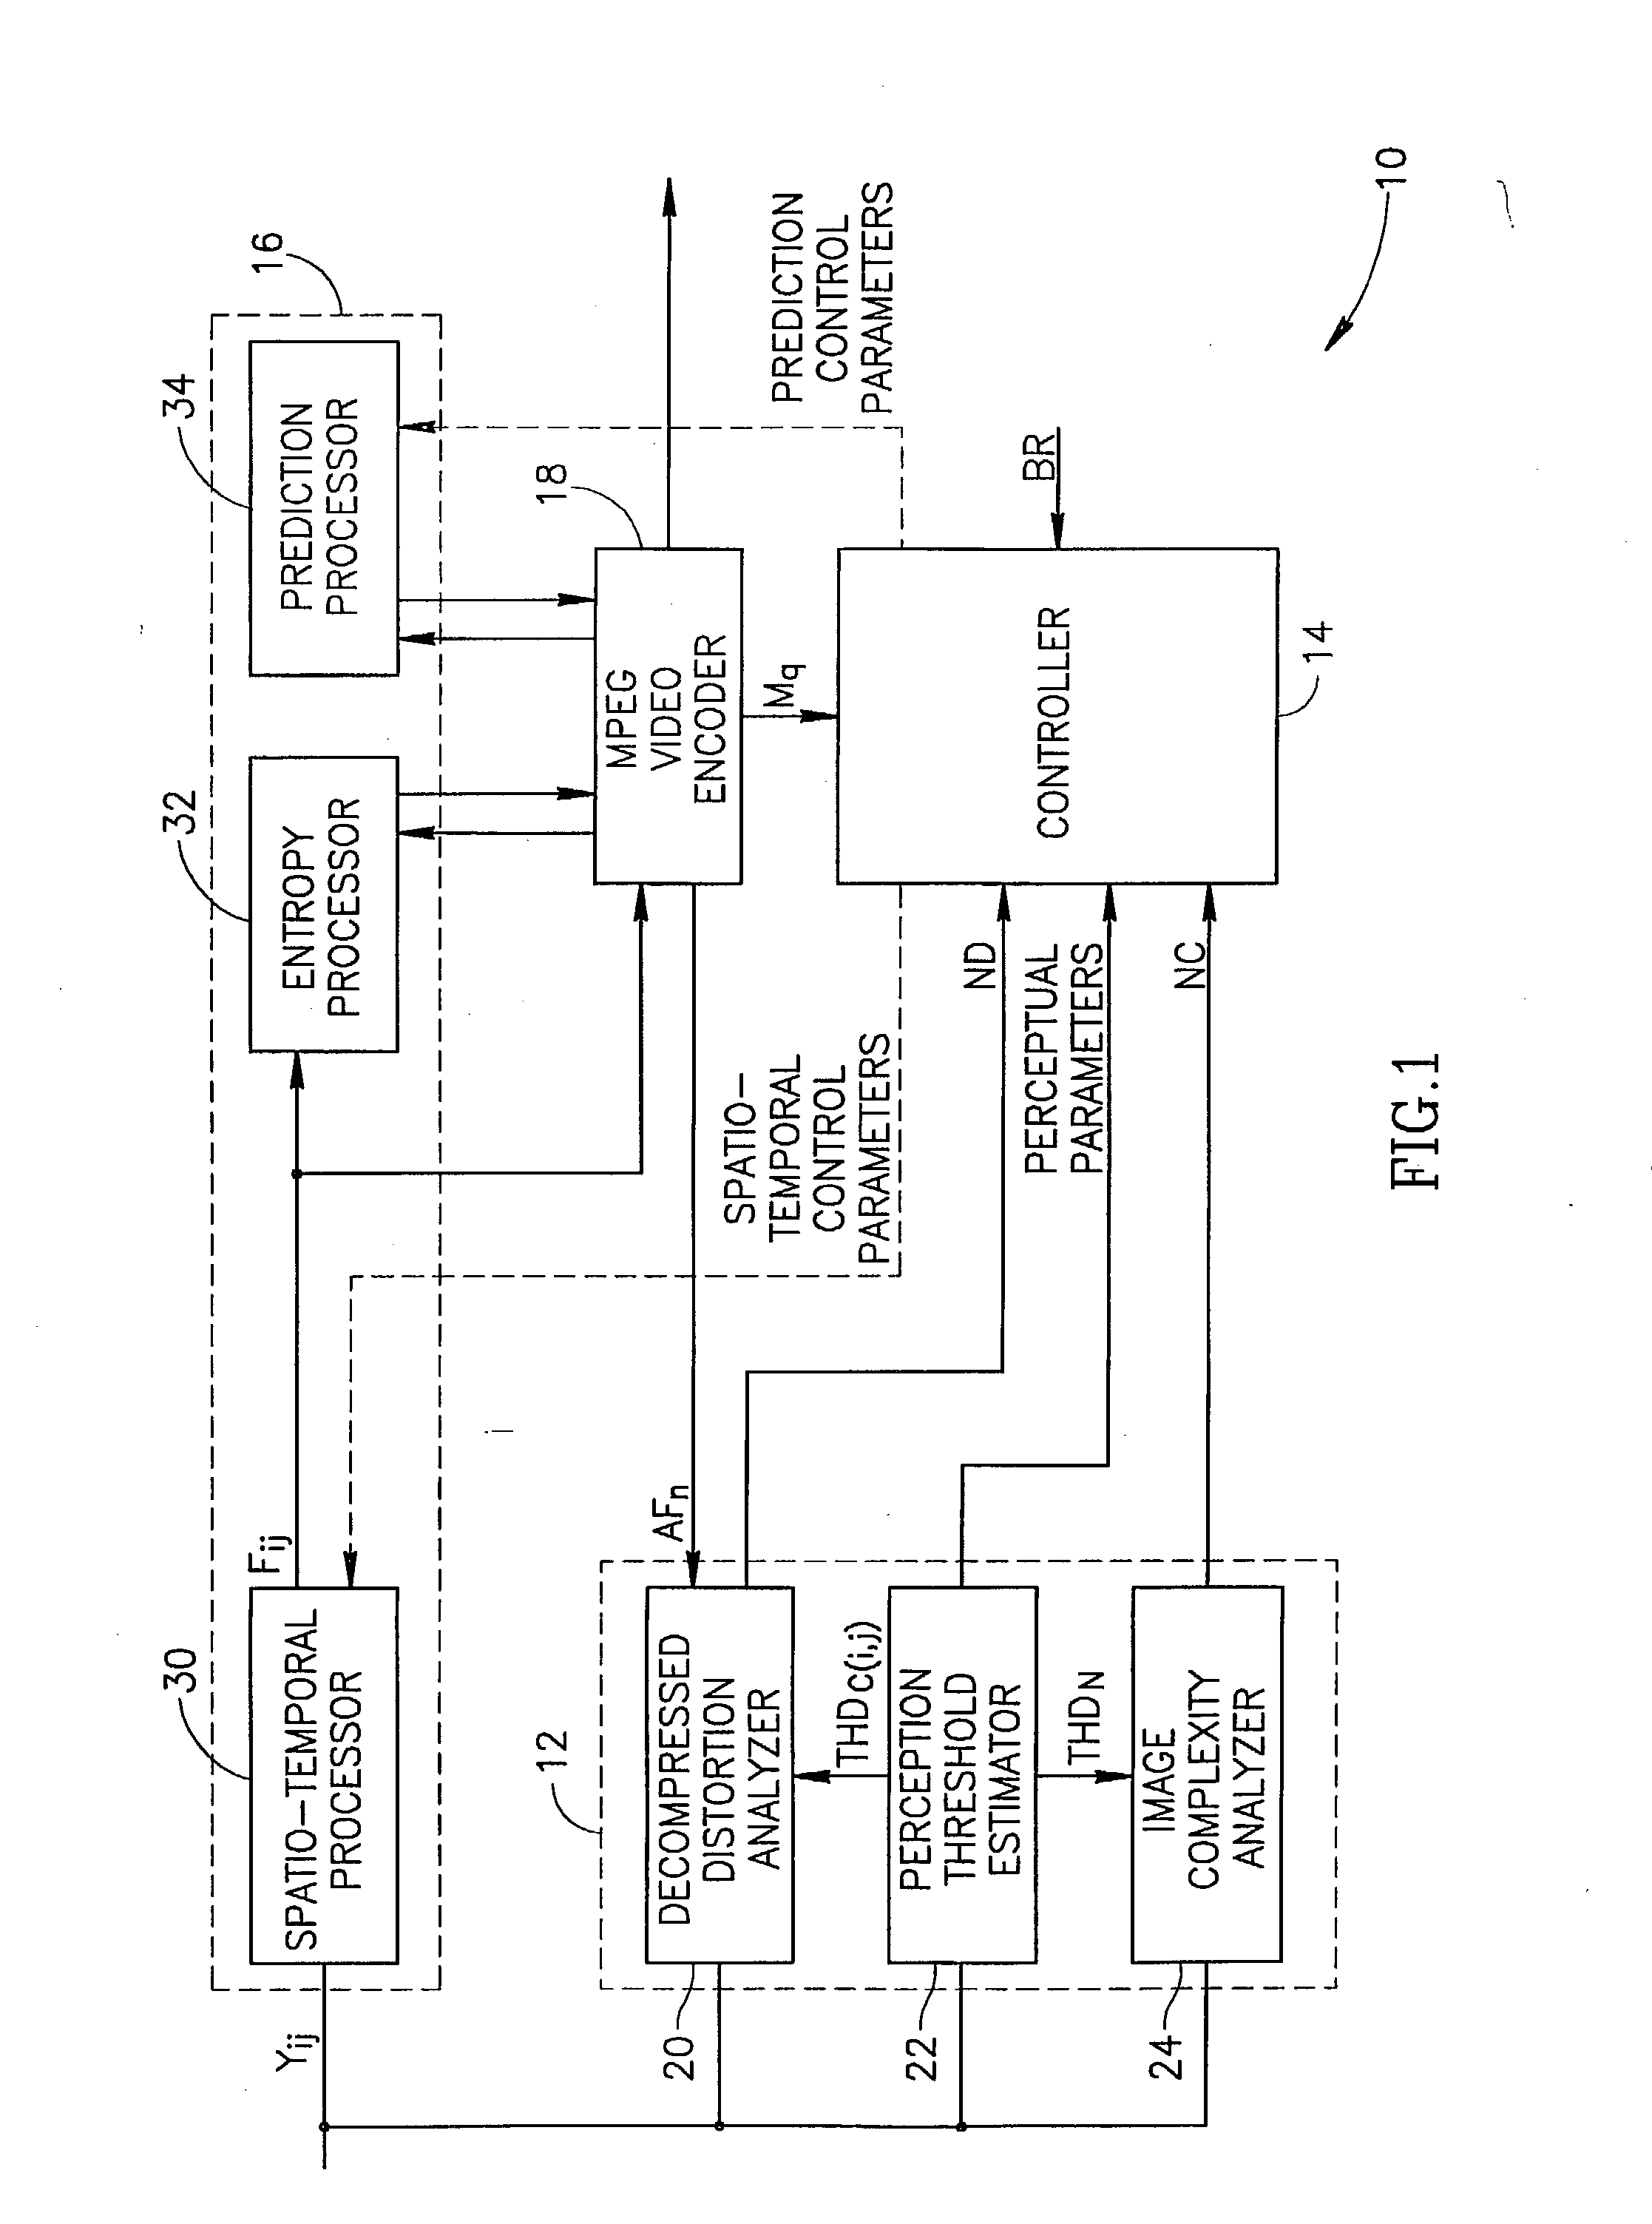 Method and apparatus for improving MPEG picture compression